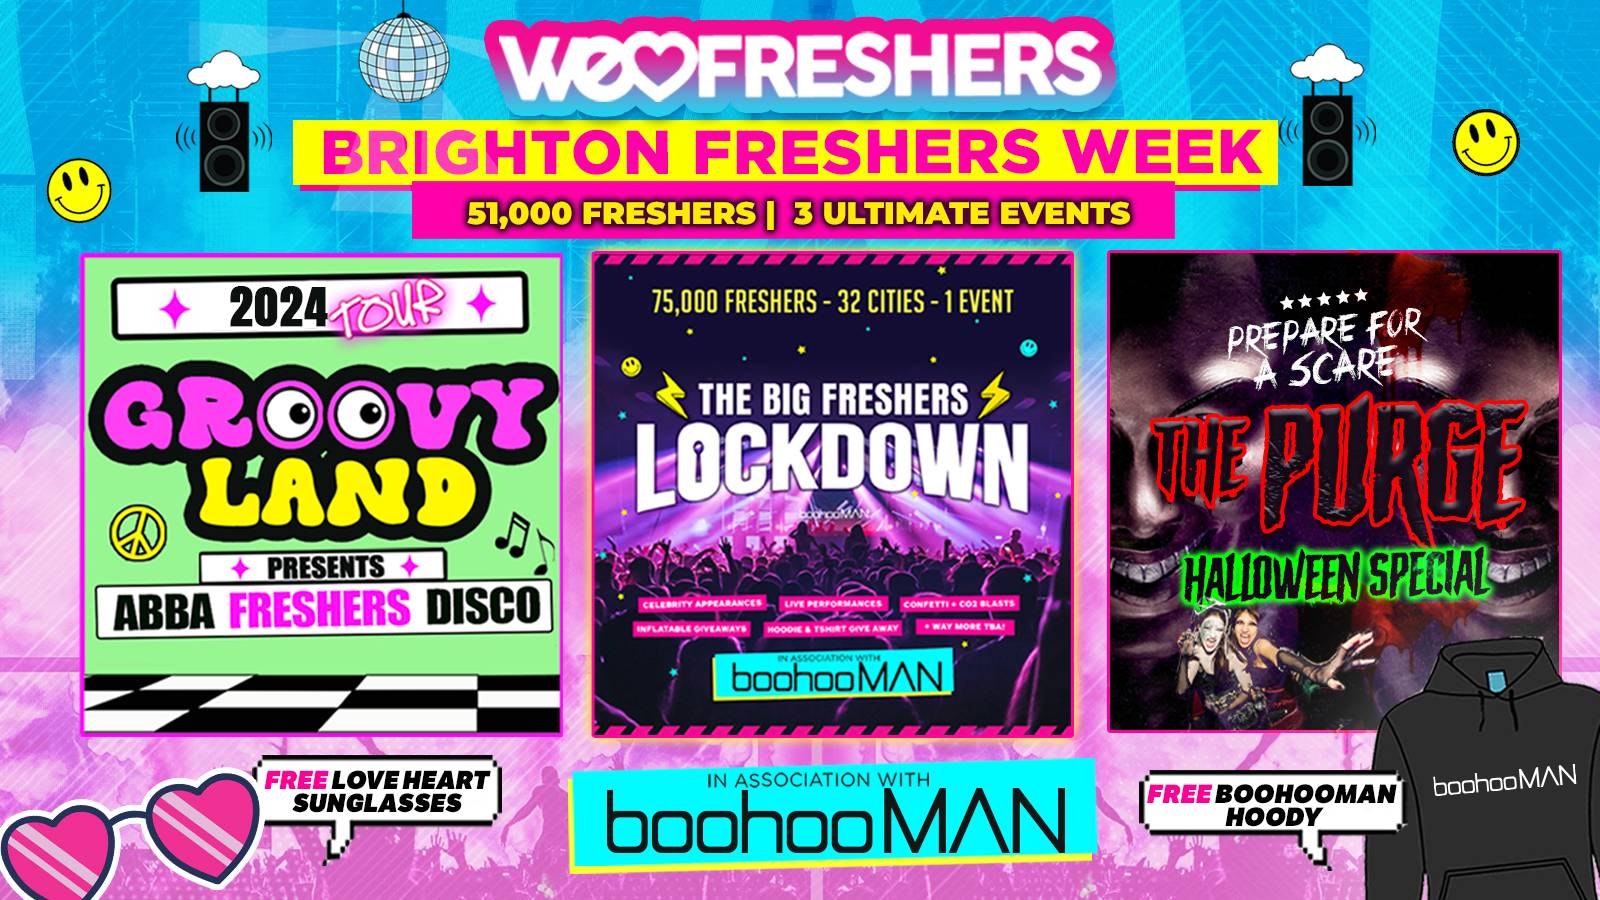 WE LOVE BRIGHTON FRESHERS 2024 in association with boohooMAN ❗FREE BOOHOOMAN HOODIE TODAY ONLY ❗